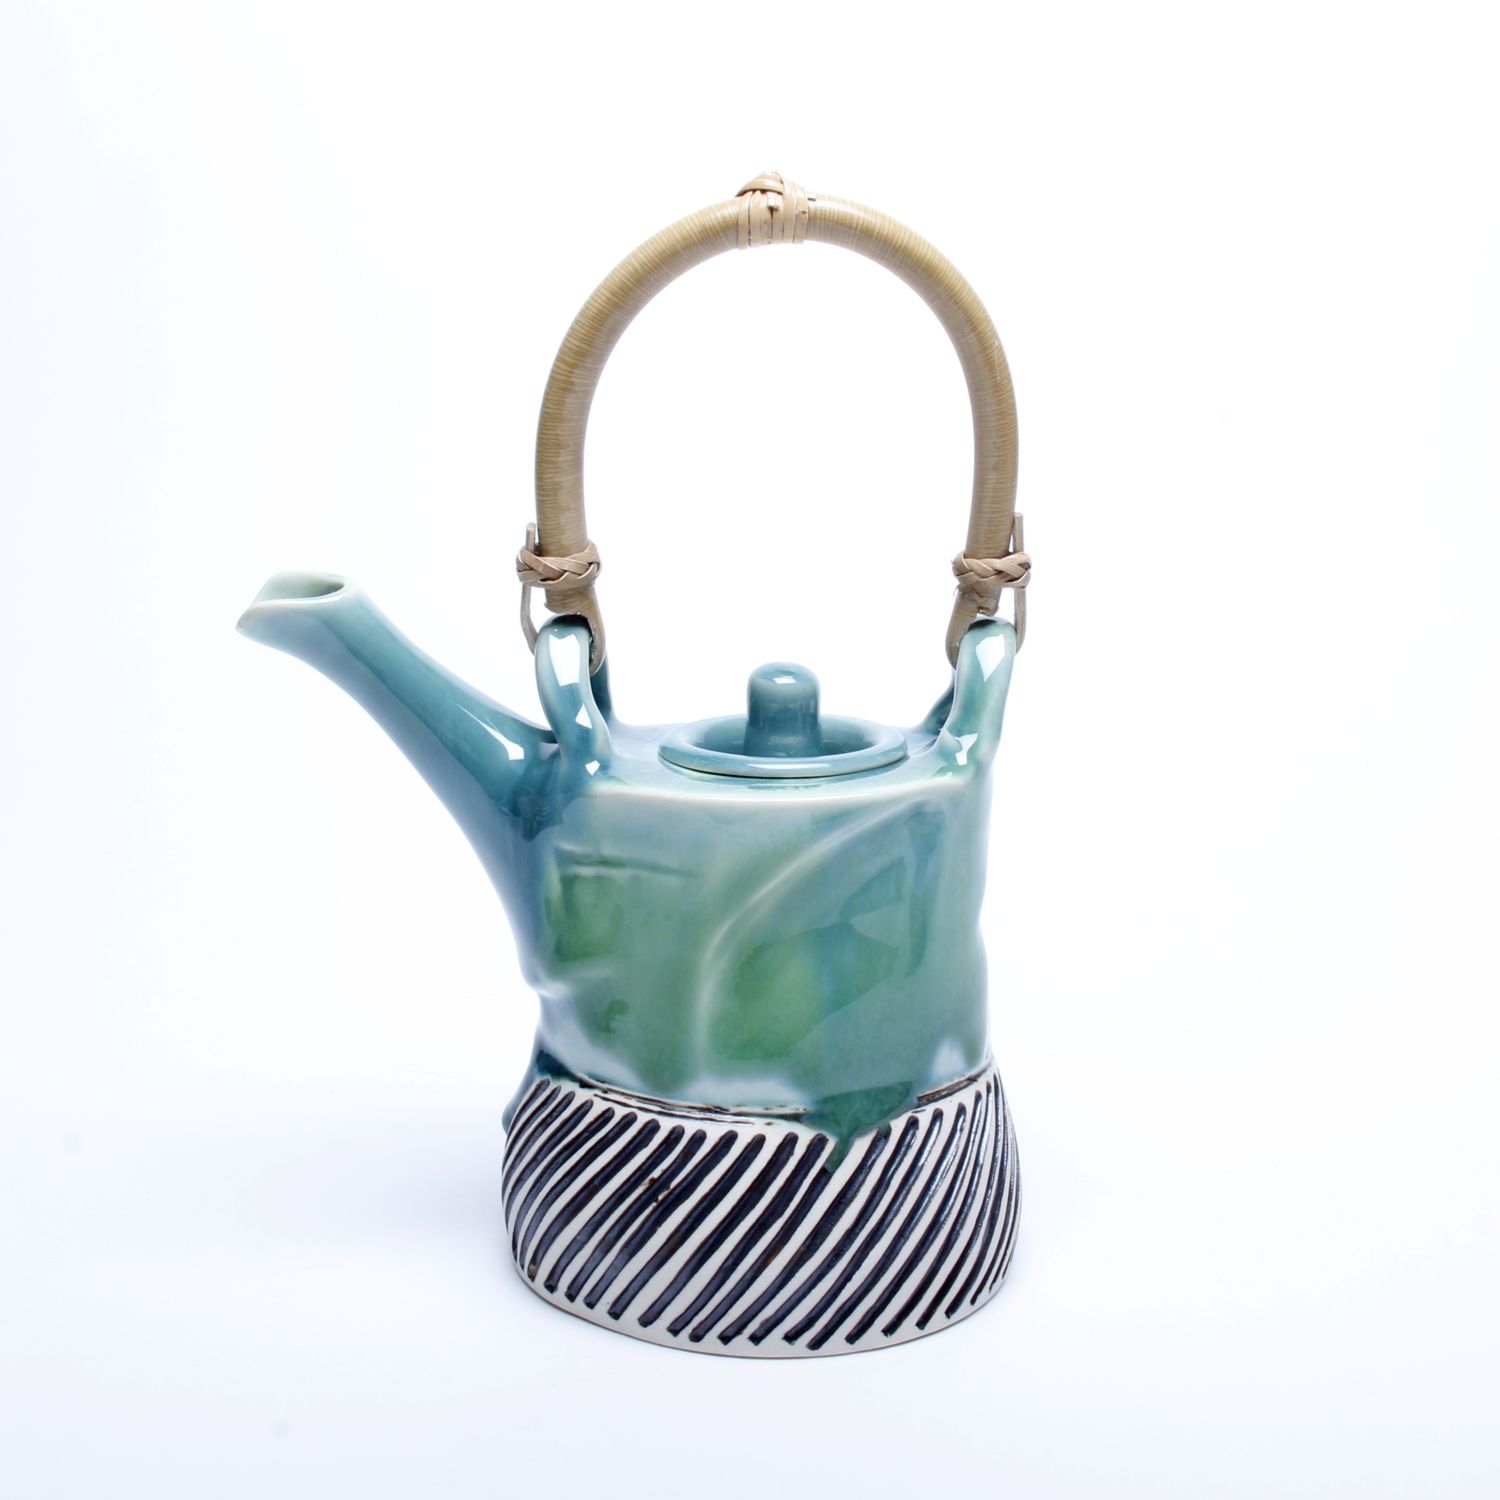 Jane Wilson: Teapot (Each sold separately) Product Image 4 of 4